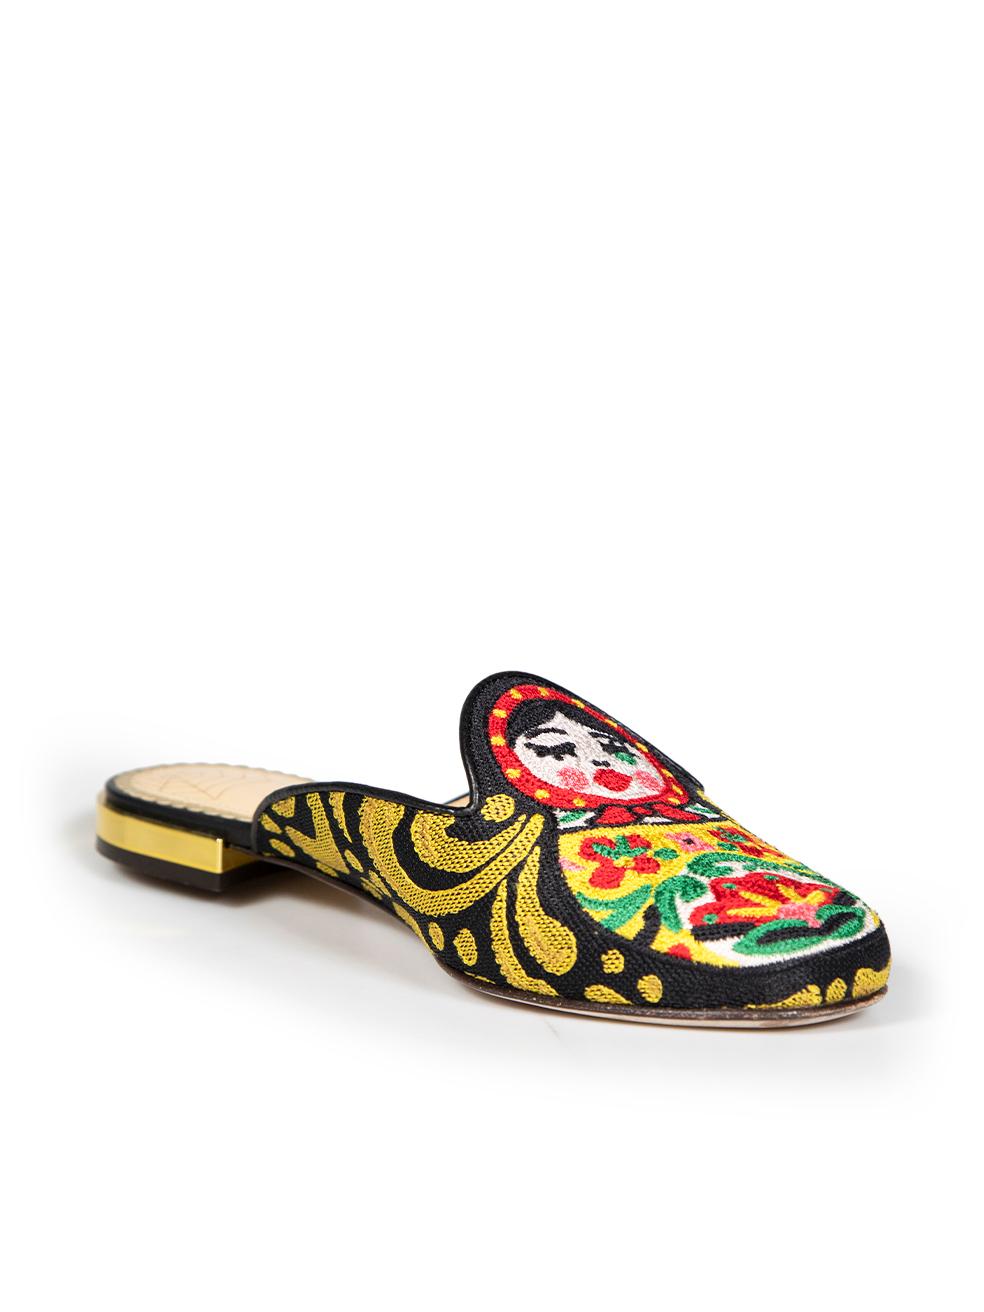 CONDITION is Very good. Minimal wear to shoes is evident. Minimal wear to soles on this used Charlotte Olympia designer resale item. These shoes come with original box and dust bag.
 
 
 
 Details
 
 
 Multicolour
 
 Cloth
 
 Mules
 
 Matryoshka